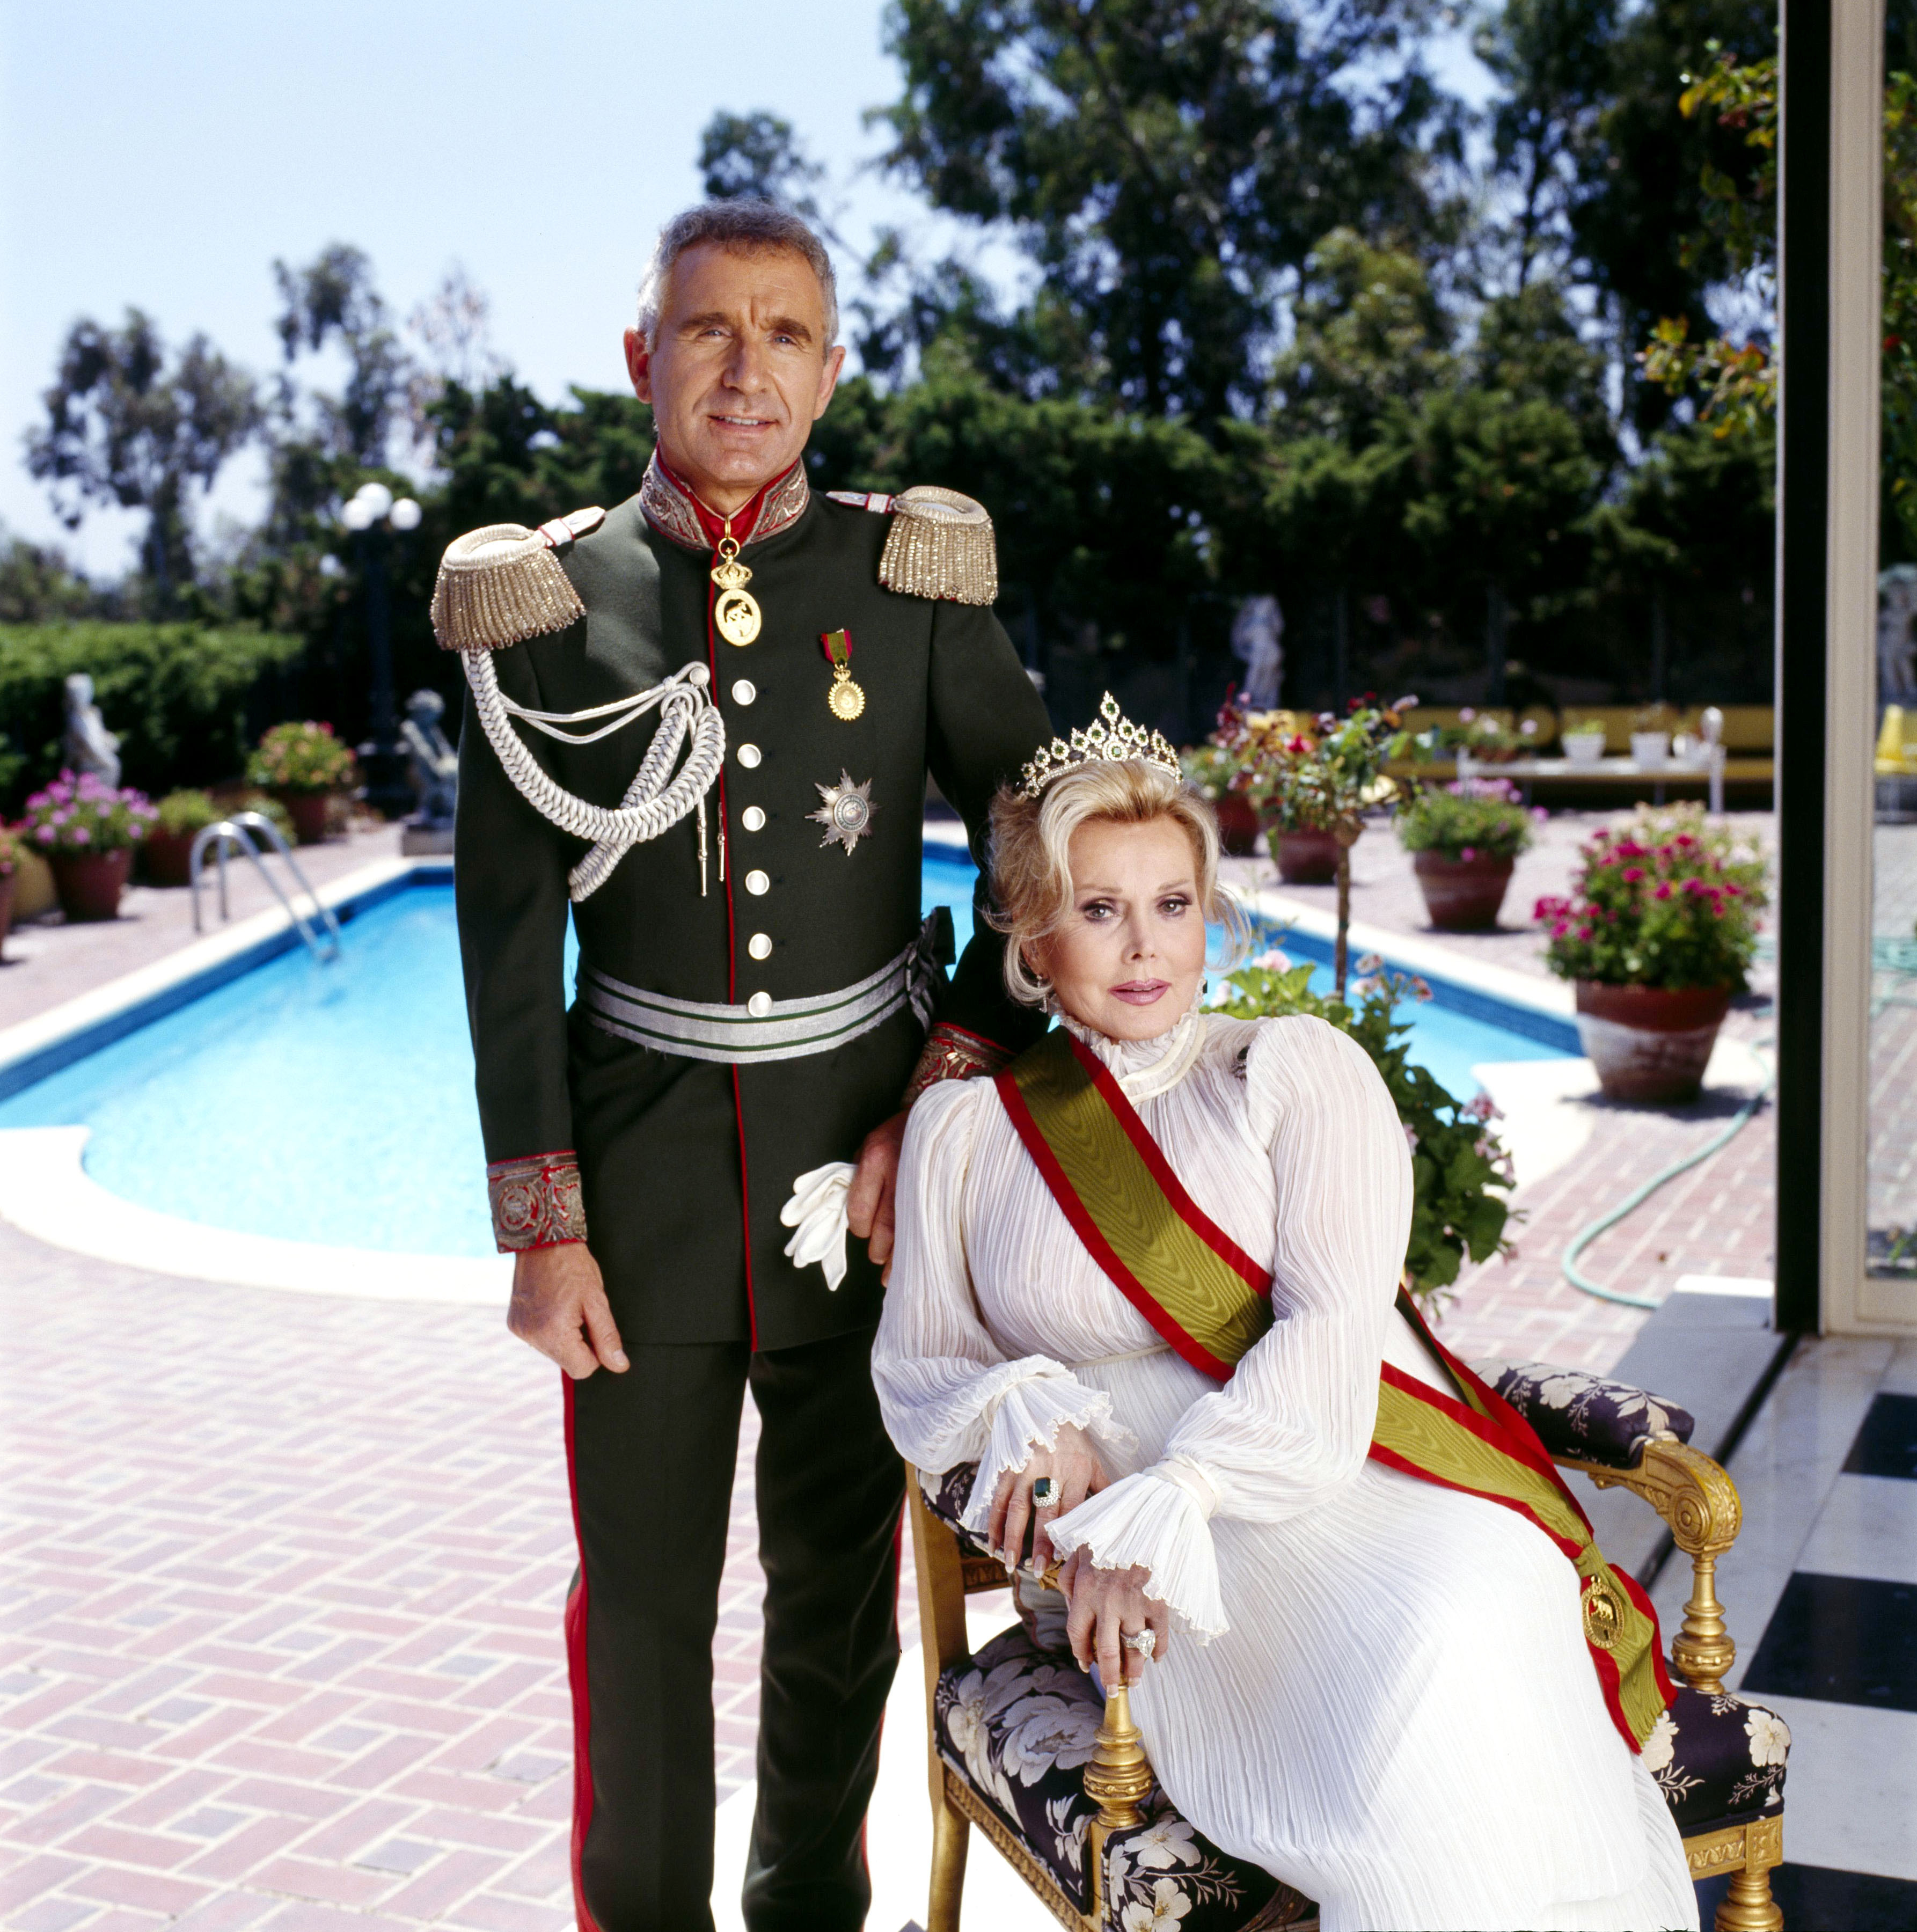 Zsa Zsa Gabor with her husband  Frederic Prinz von Anhalt photographed at home on June 6, 1990 in Bel Air, California | Source: Getty Images